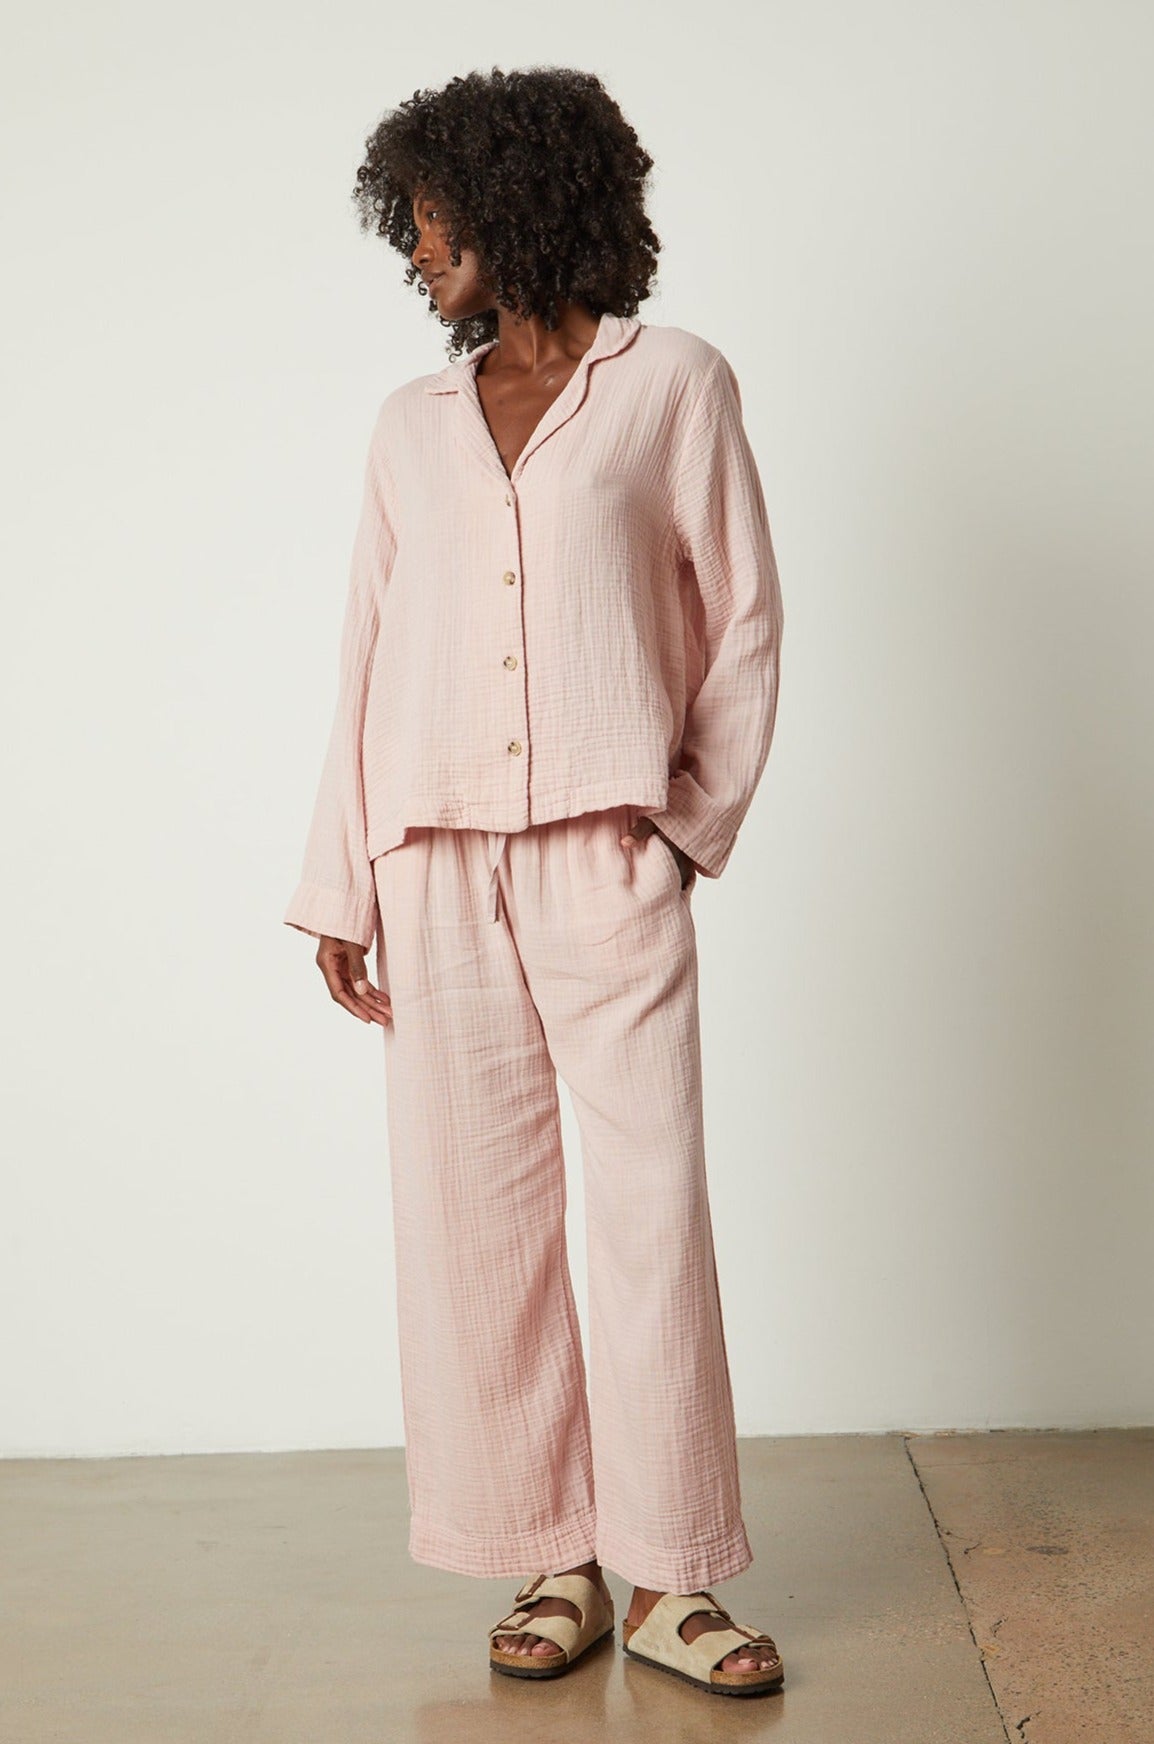 The model is wearing a pink linen pajama pant set from Jenny Graham Home.-25519563374785